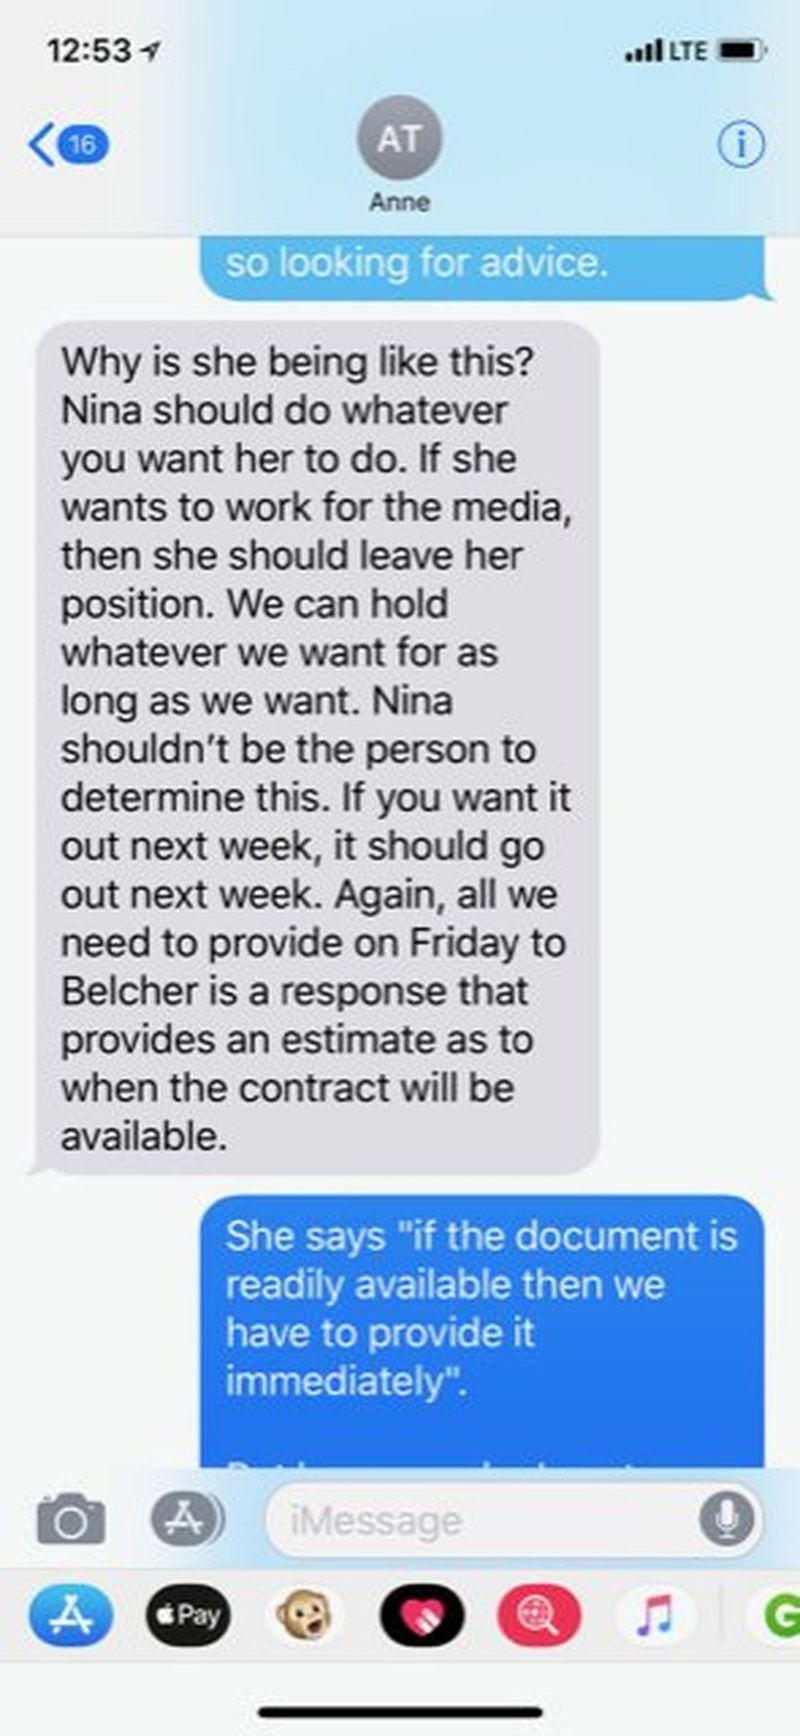 Text messages sent by Atlanta Mayor Kasim Reed’s former top spokeswoman Anne Torres to Atlanta Beltline CEO Brian McGowan, show Torres pressured Beltline officials to delay production of public records.